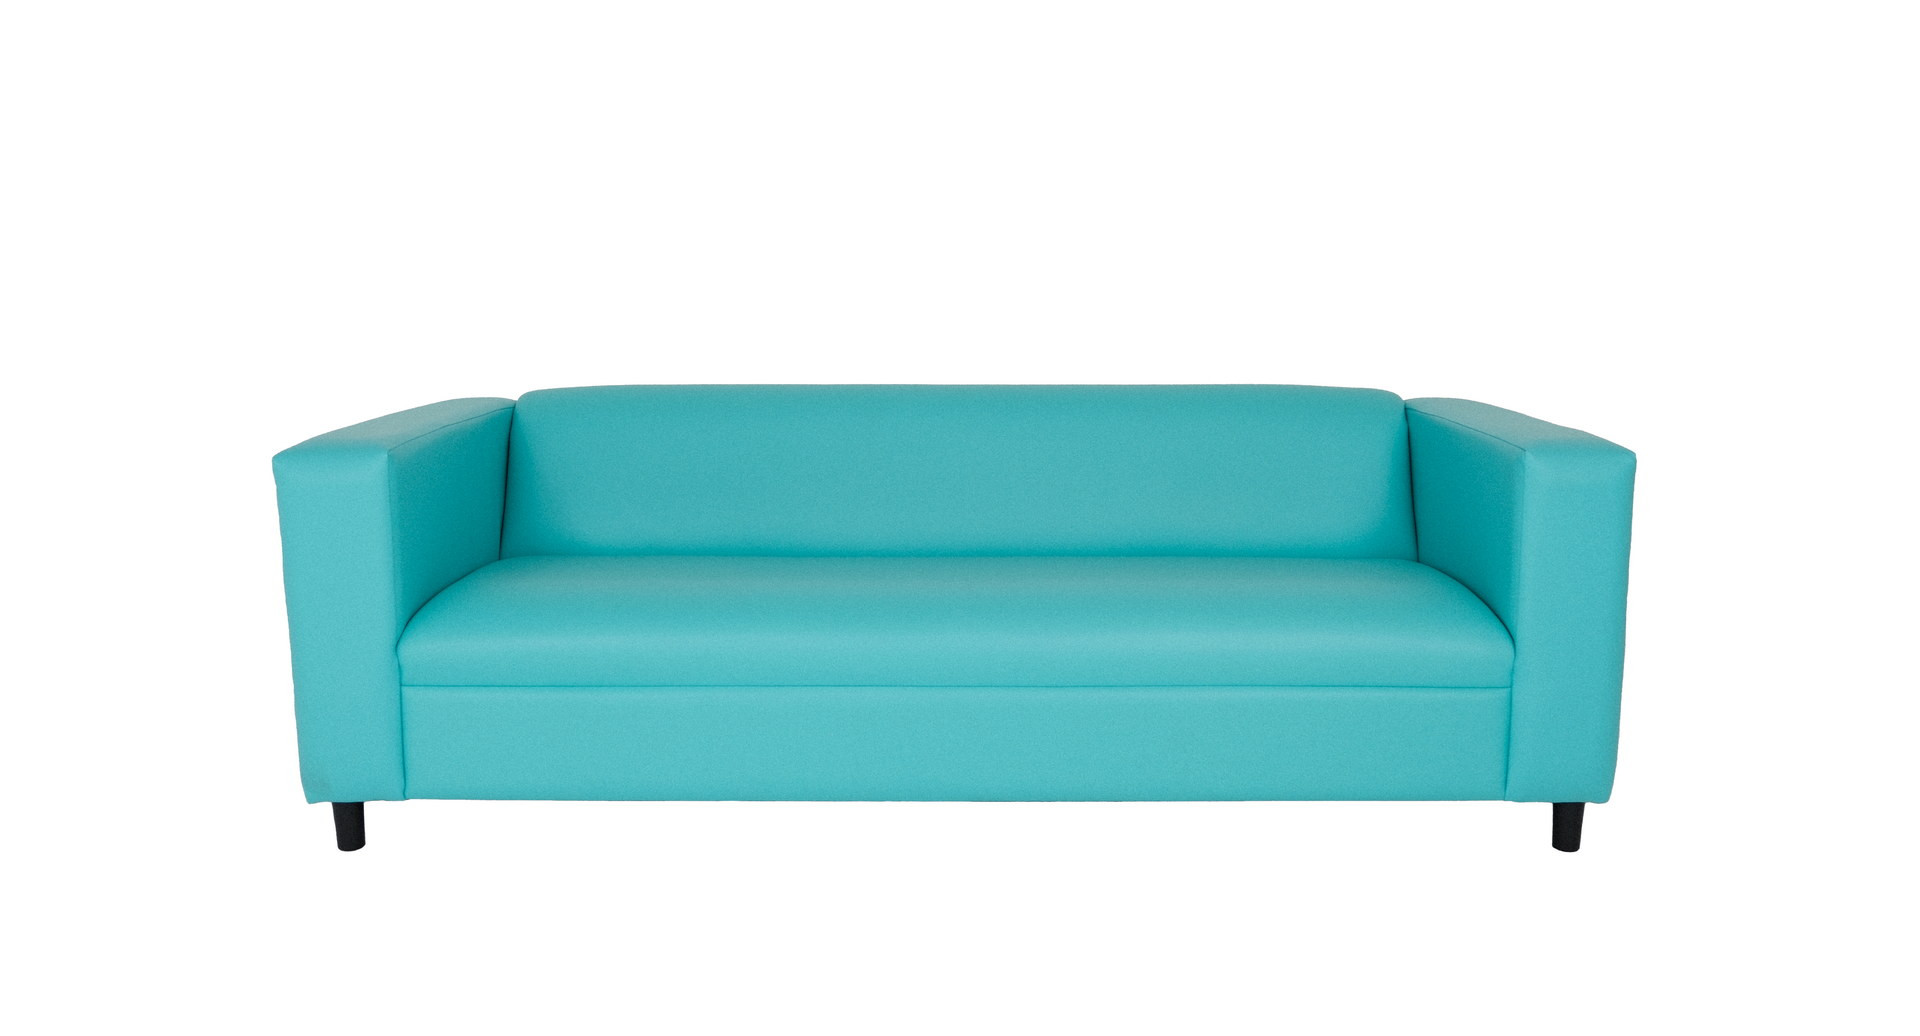 84" Teal Blue Faux Leather And Black Sofa-530488-1